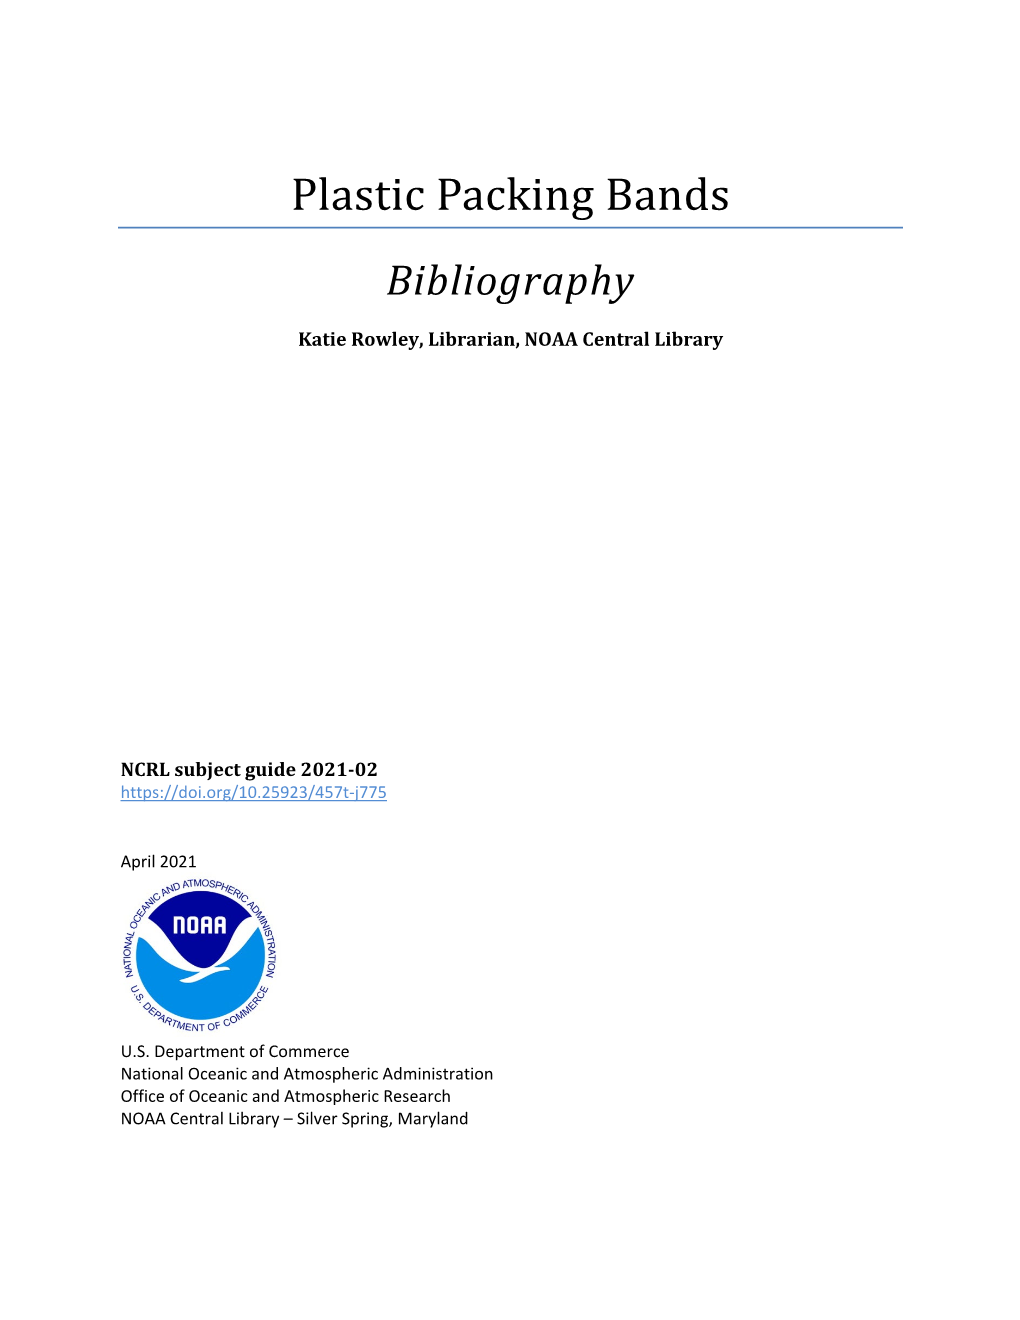 Plastic Packing Bands Bibliography